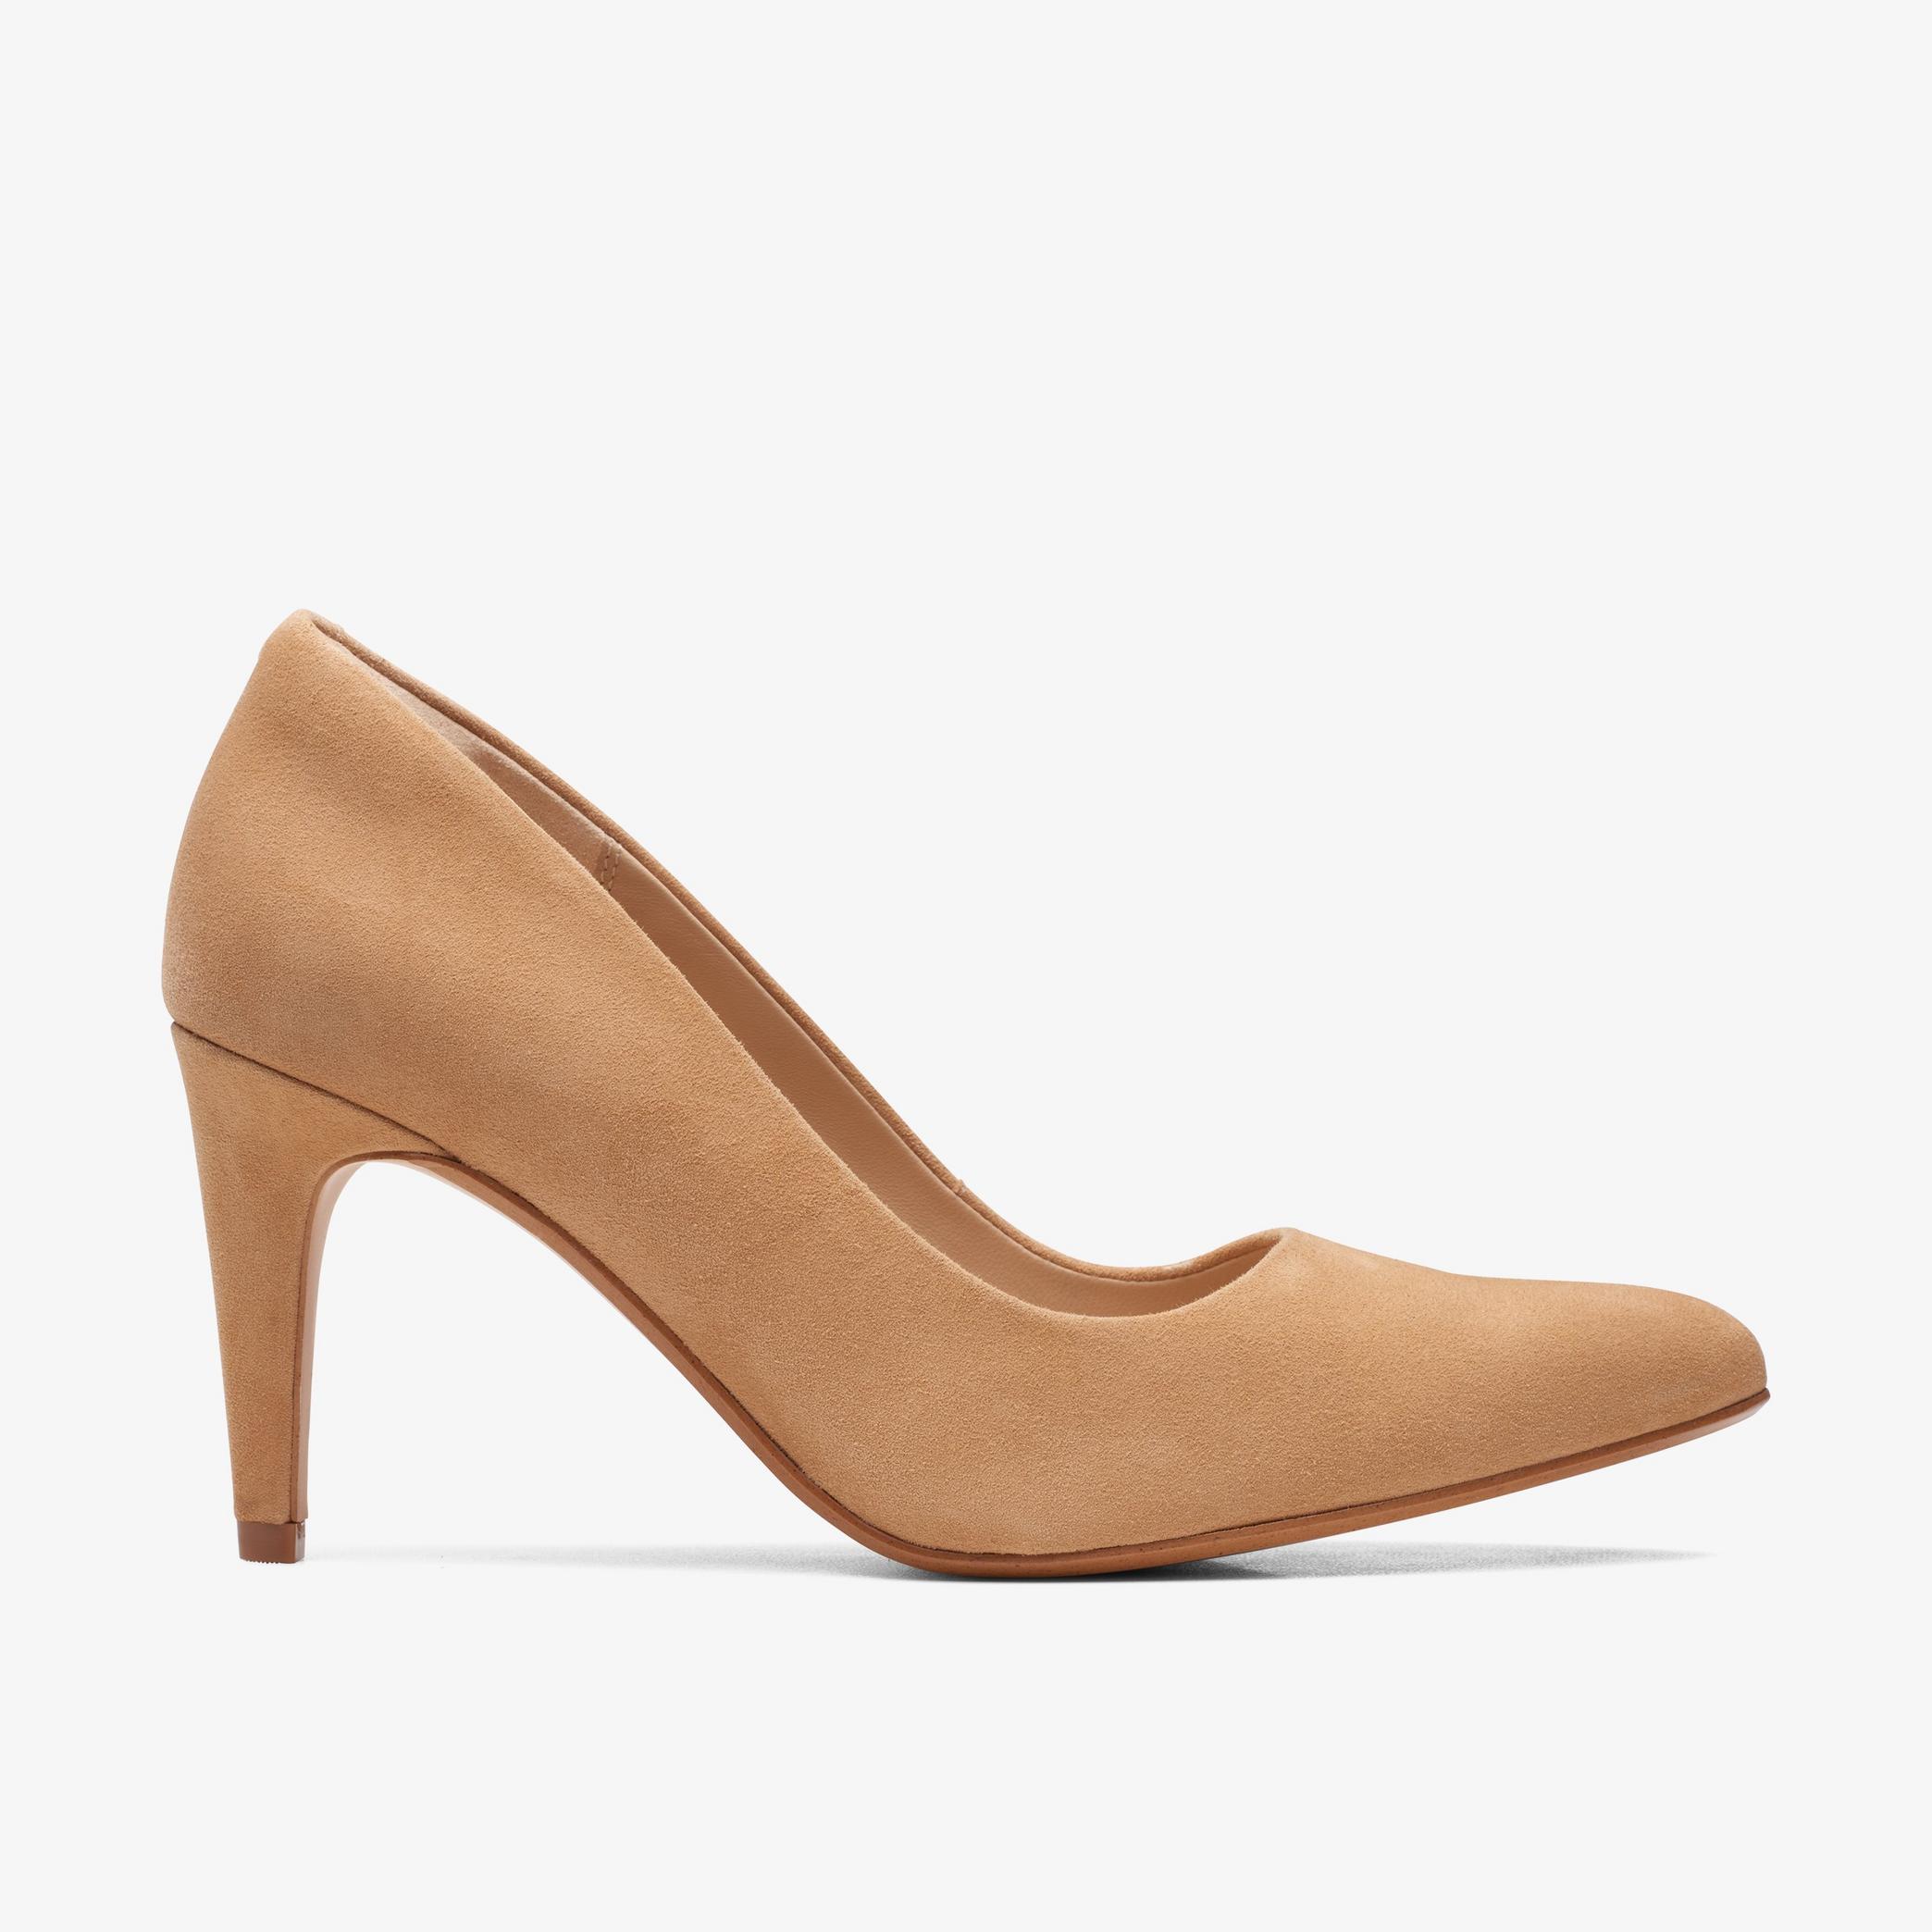 Laina Rae Camel Suede Court Shoes, view 1 of 6